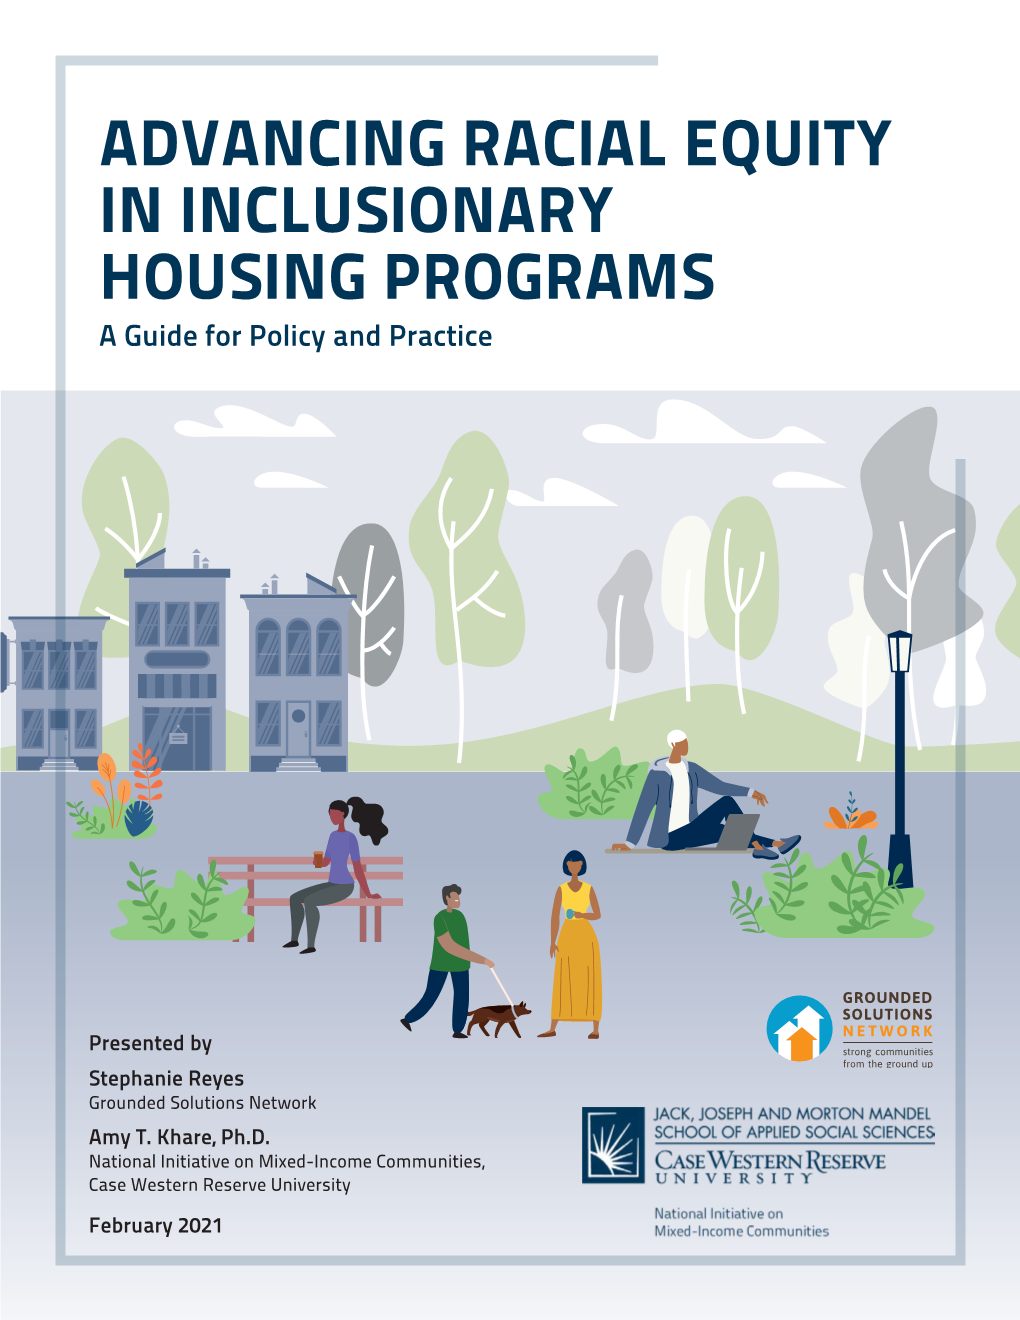 Advancing Racial Equity in Inclusionary Housing Programs: A